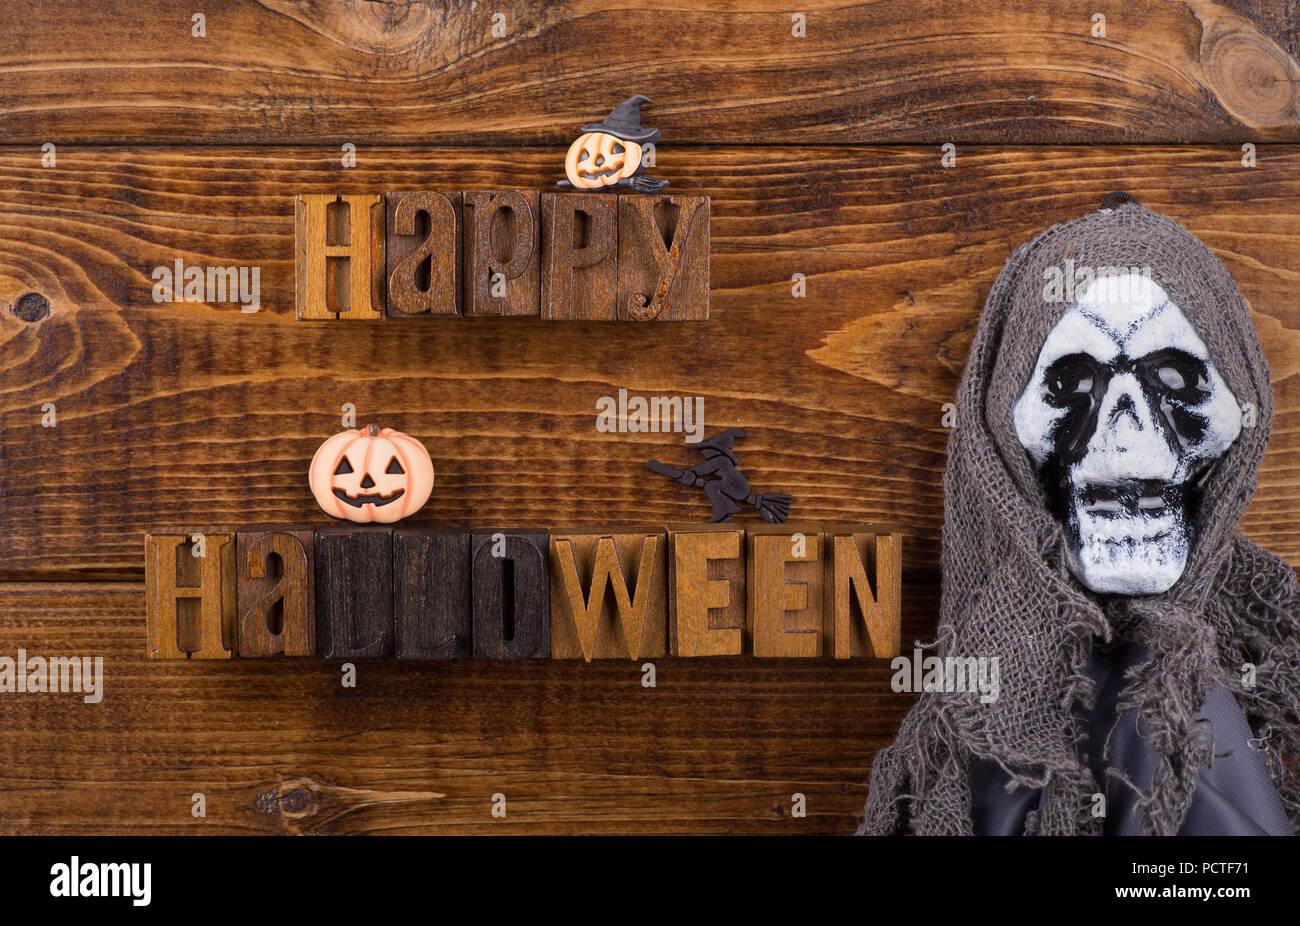 Happy Halloween sign with halloween decorations on a wood background Stock Photo